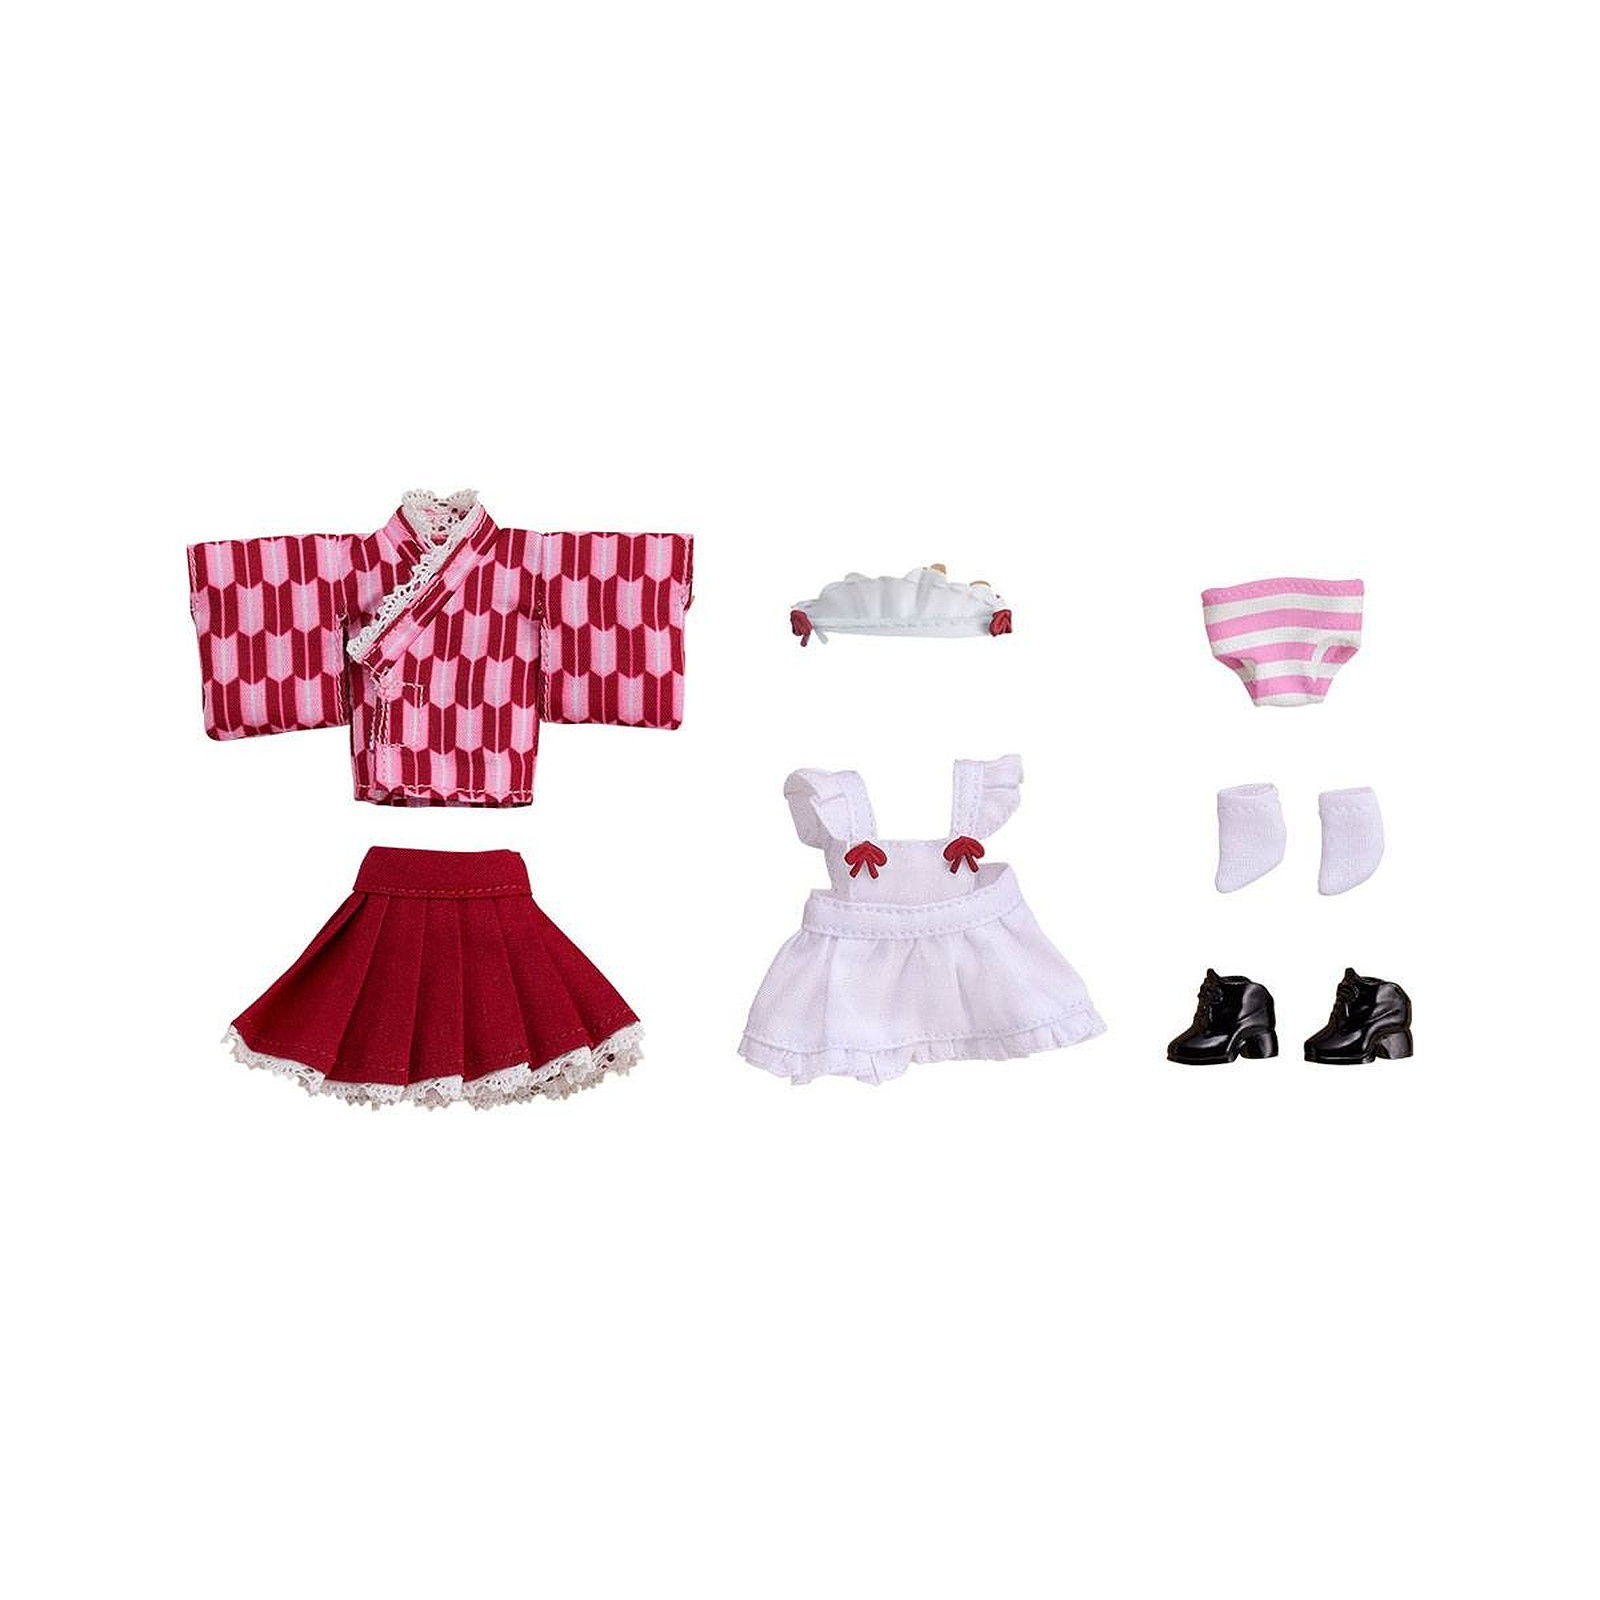 Original Character - Accessoires pour figurines Nendoroid Doll Outfit Set Japanese-Style Maid P - Figurines Good Smile Company